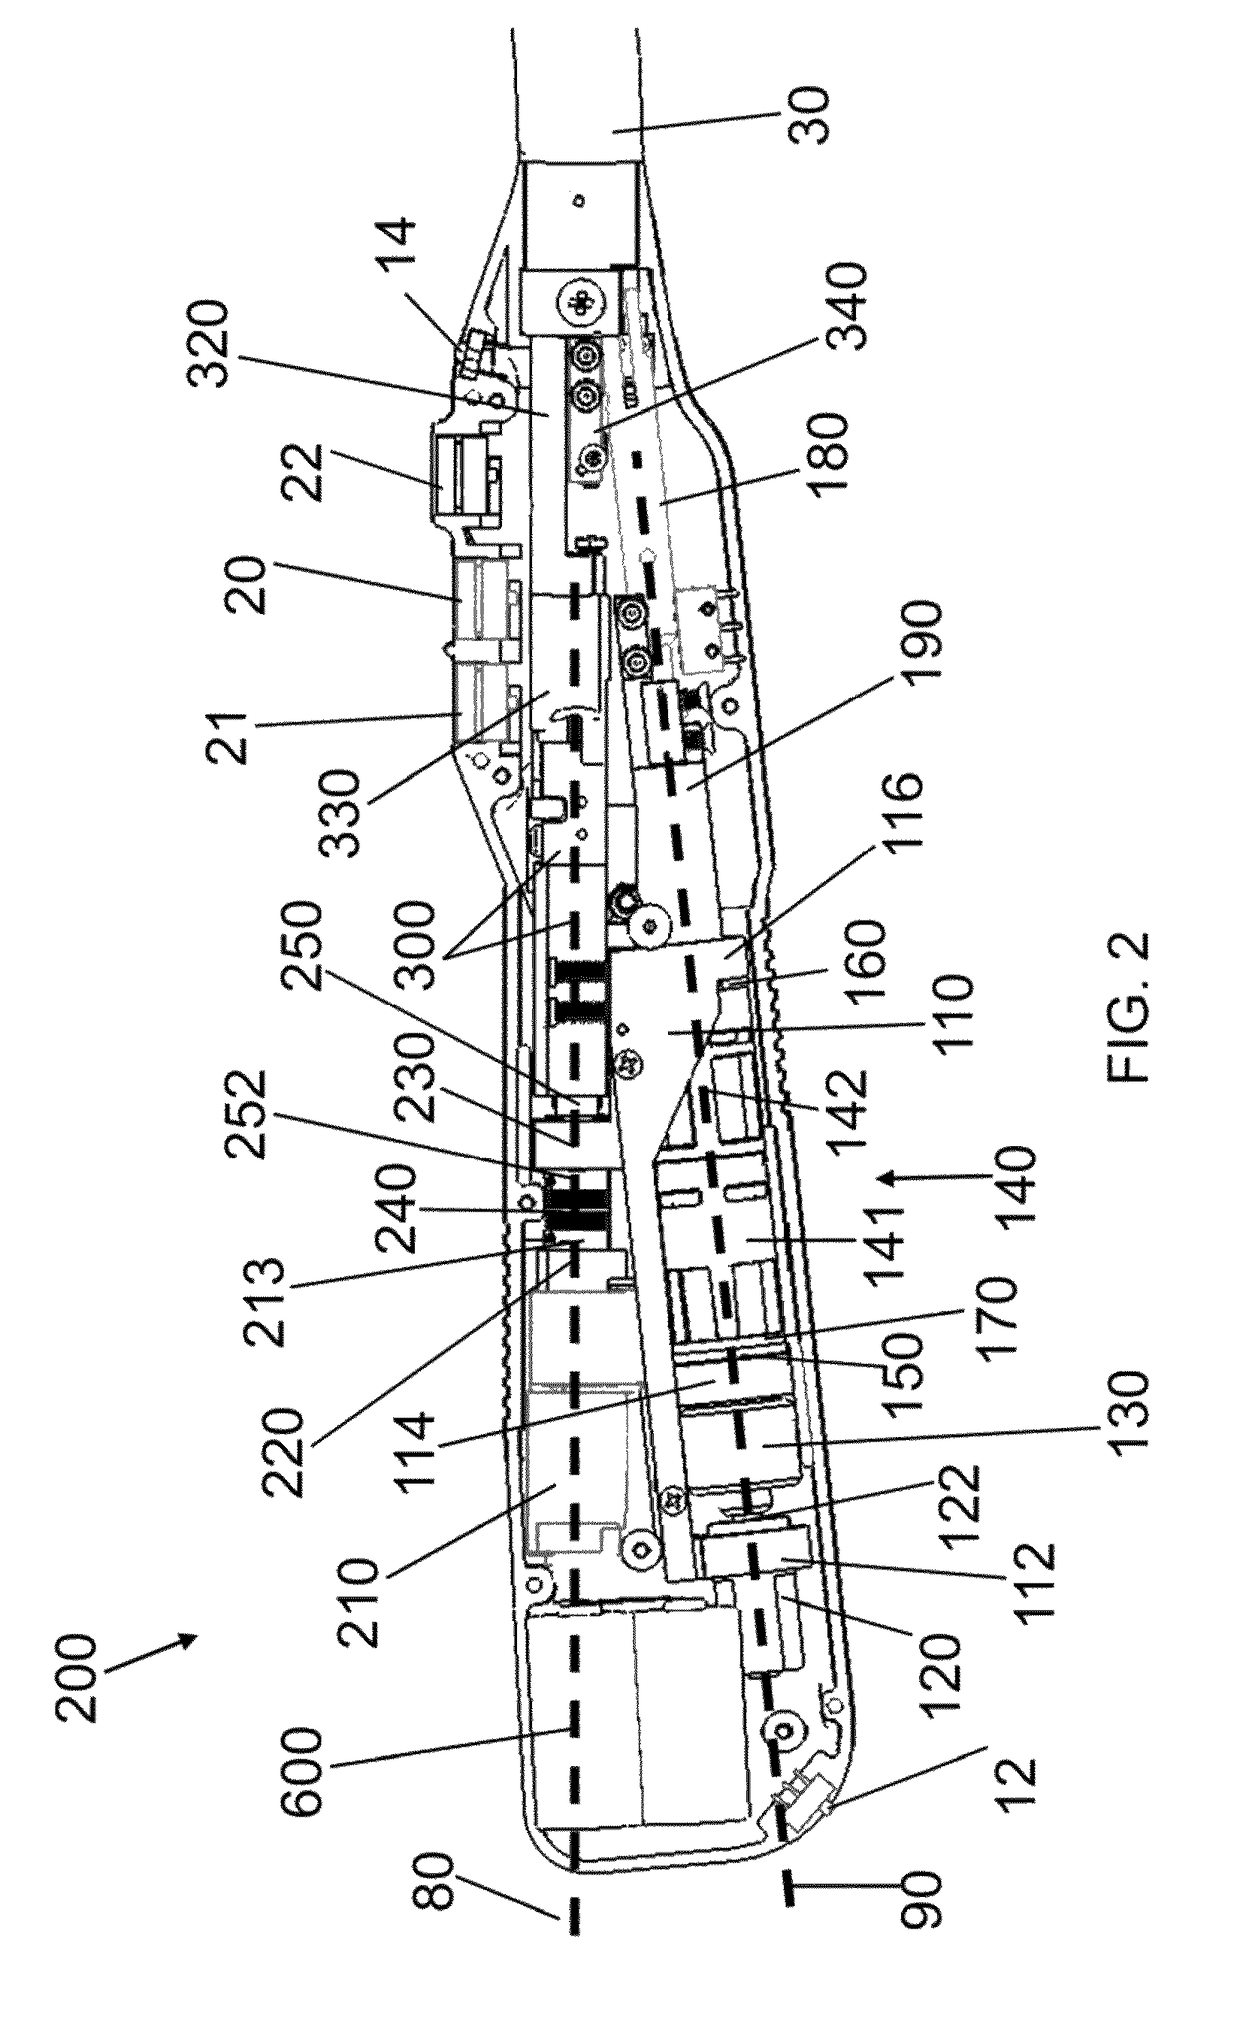 Electrically self-powered surgical instrument with cryptographic identification of interchangeable part